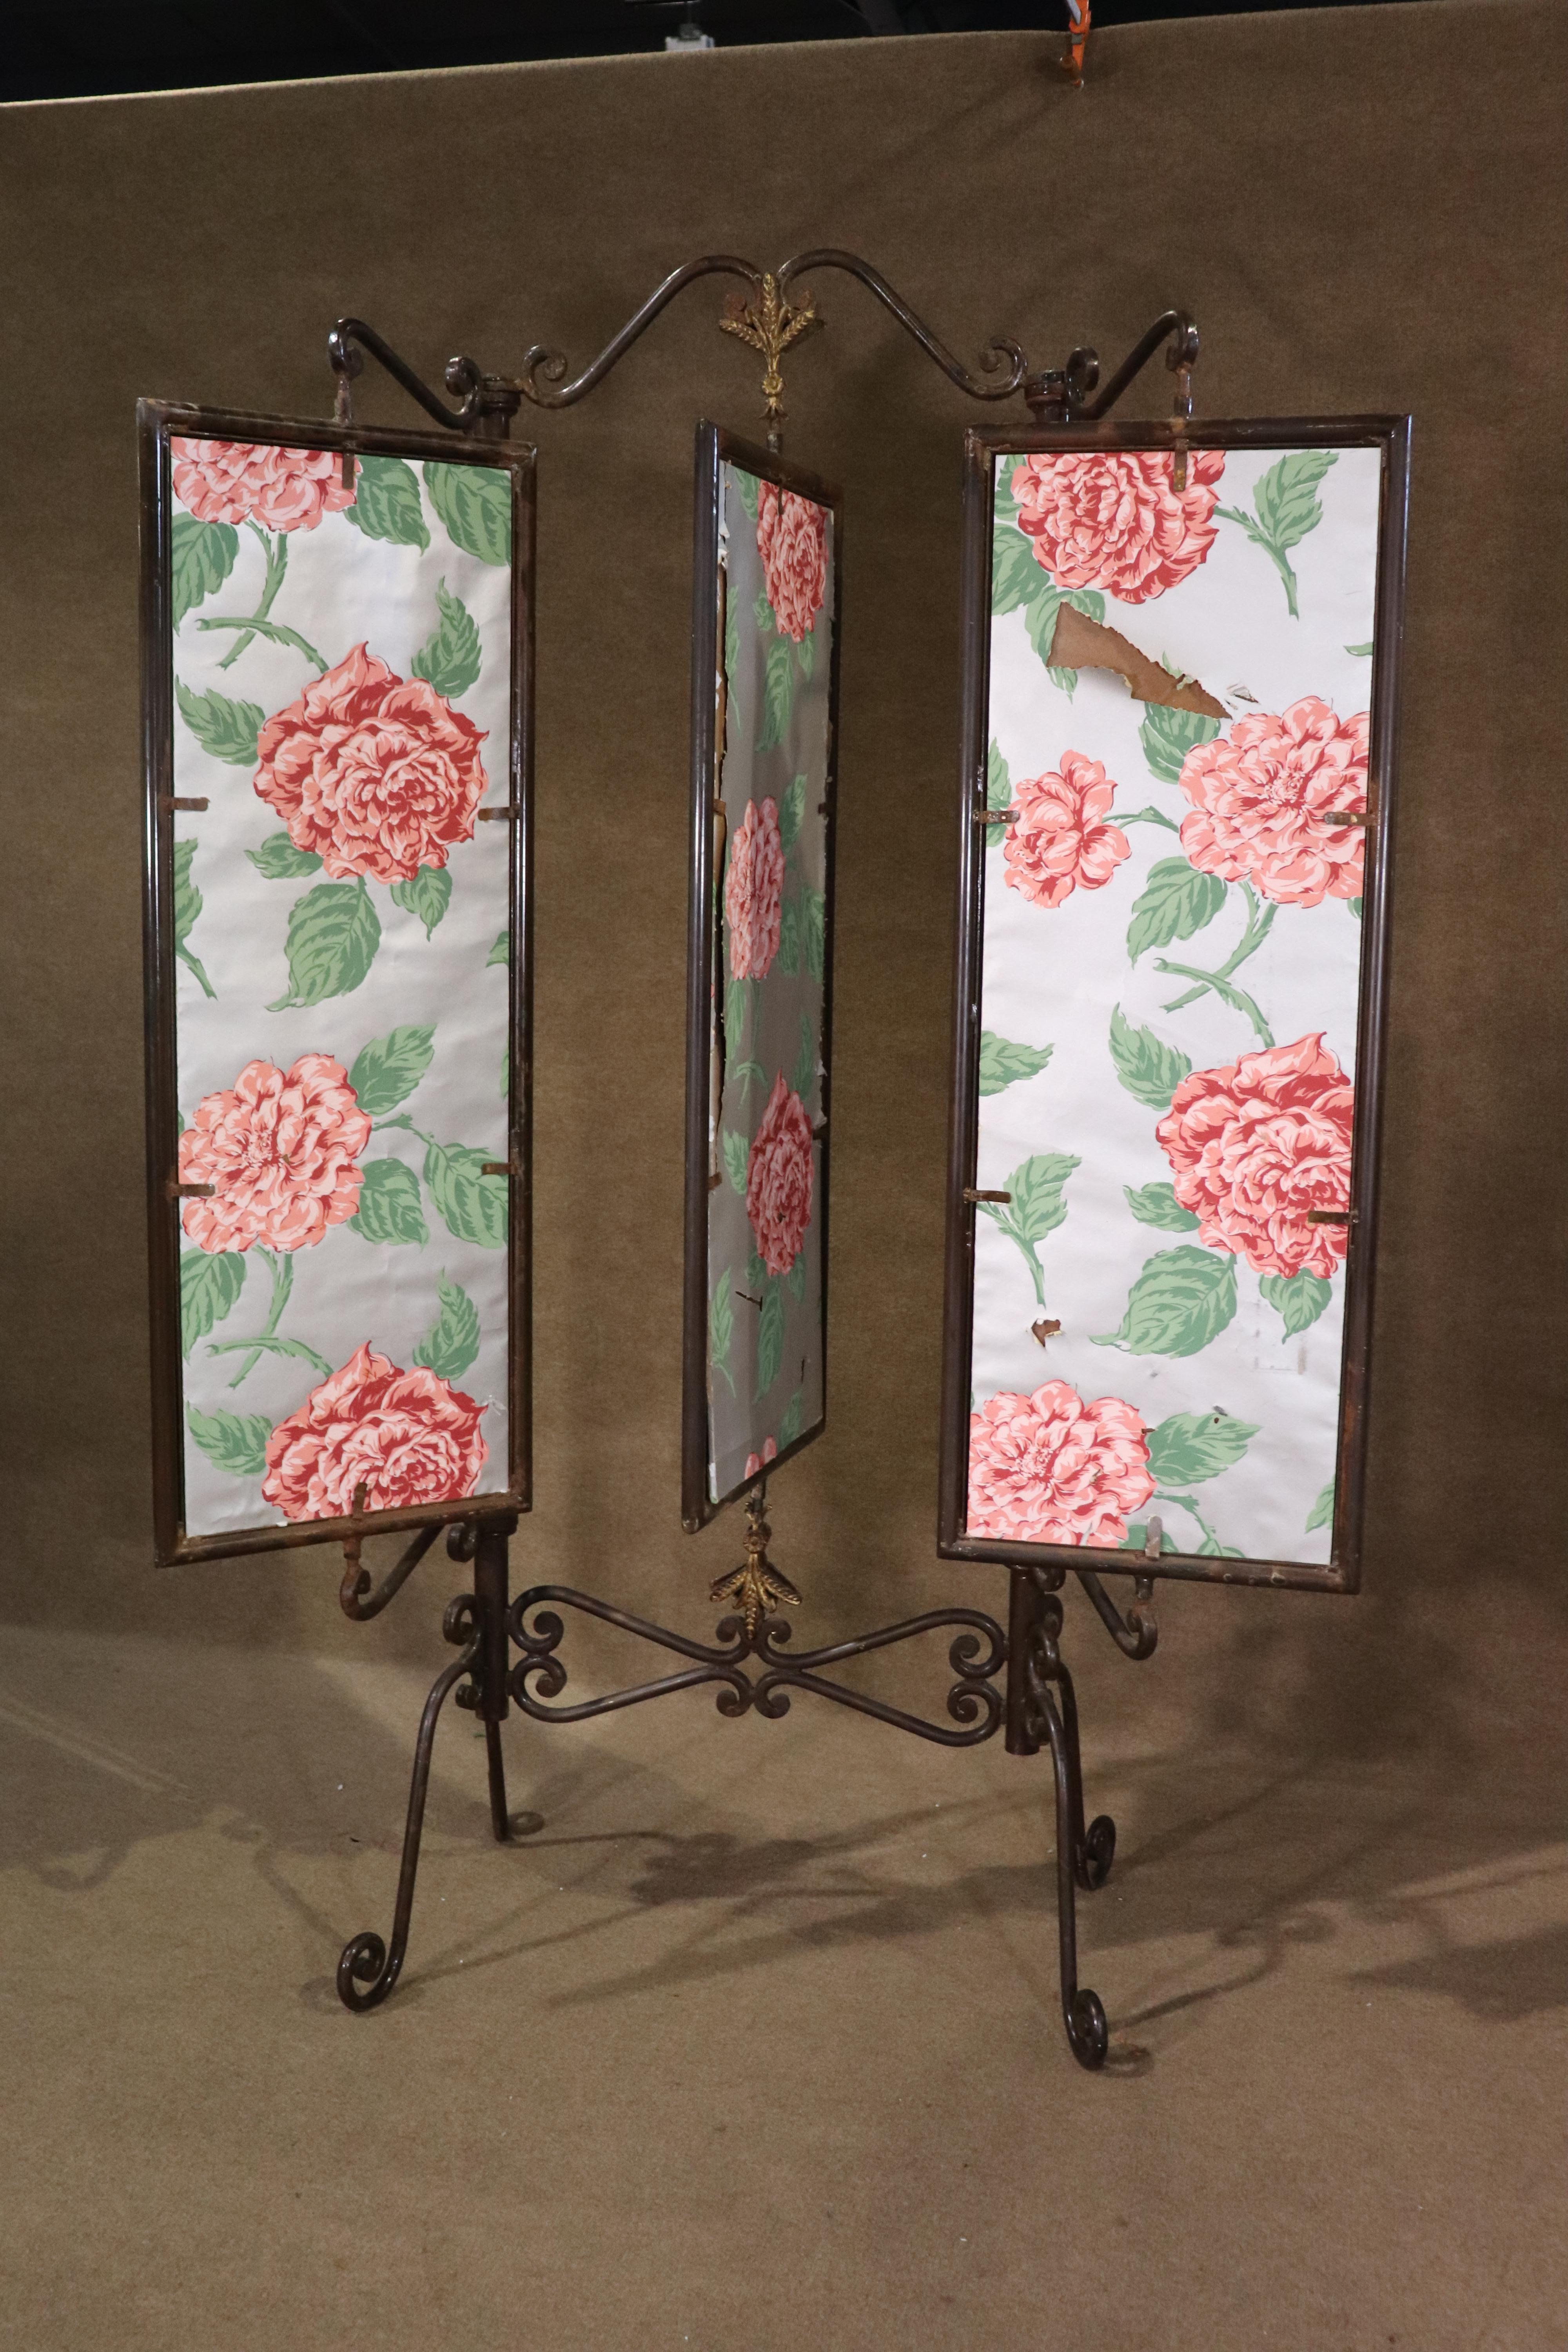 Antique dressing mirror made of strong iron with decorative embellishments. Three movable mirrors with floral paper on back. 
Please confirm location NY or NJ